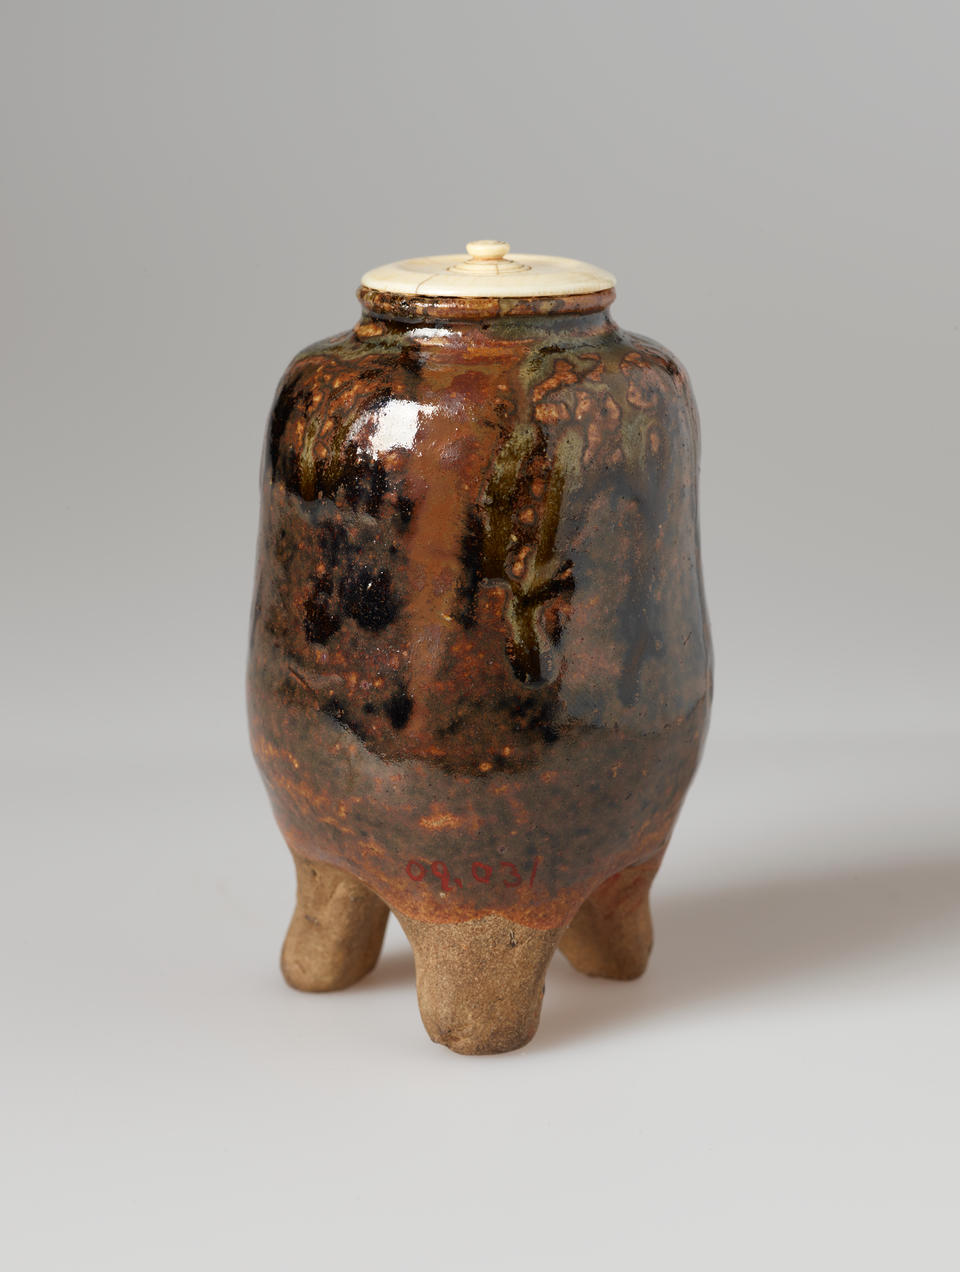 Small vessel in shades of reddish brown and black, standing on three rounded feet, with a cream colored lid.